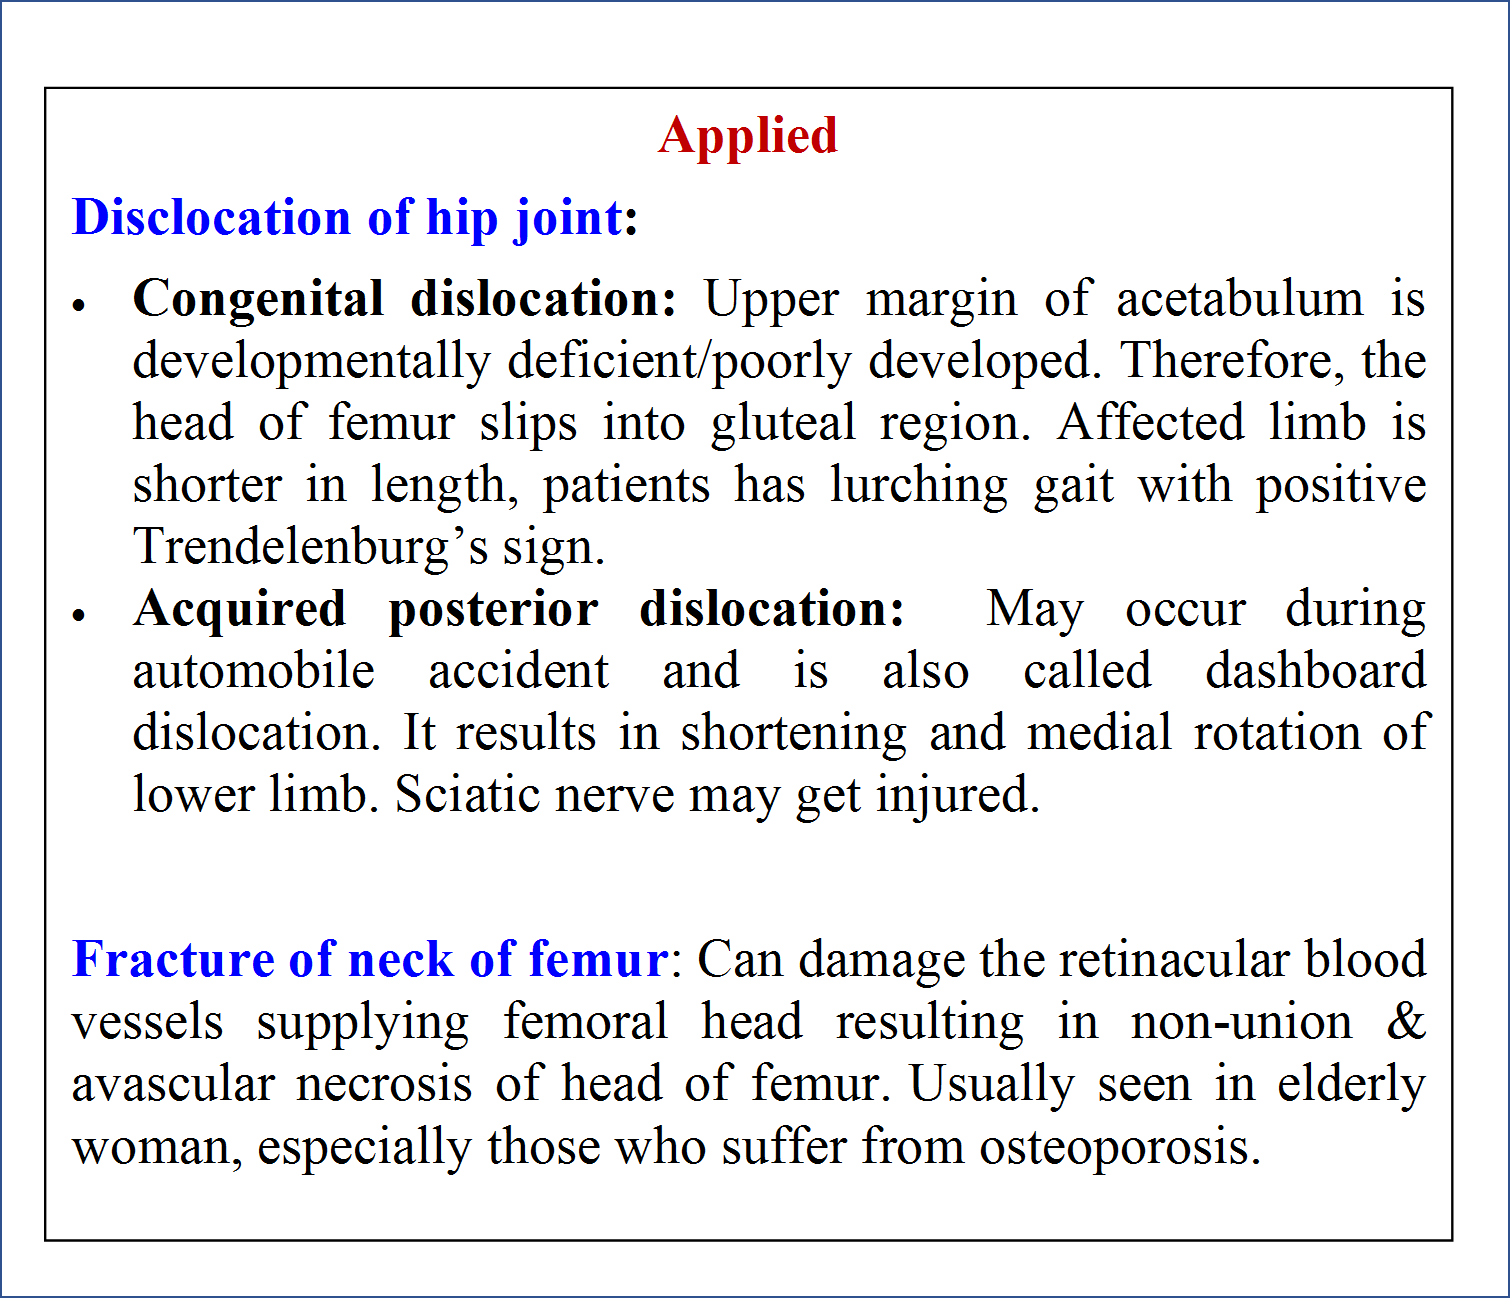 Dislocation of hip joint and fracture of hip joint